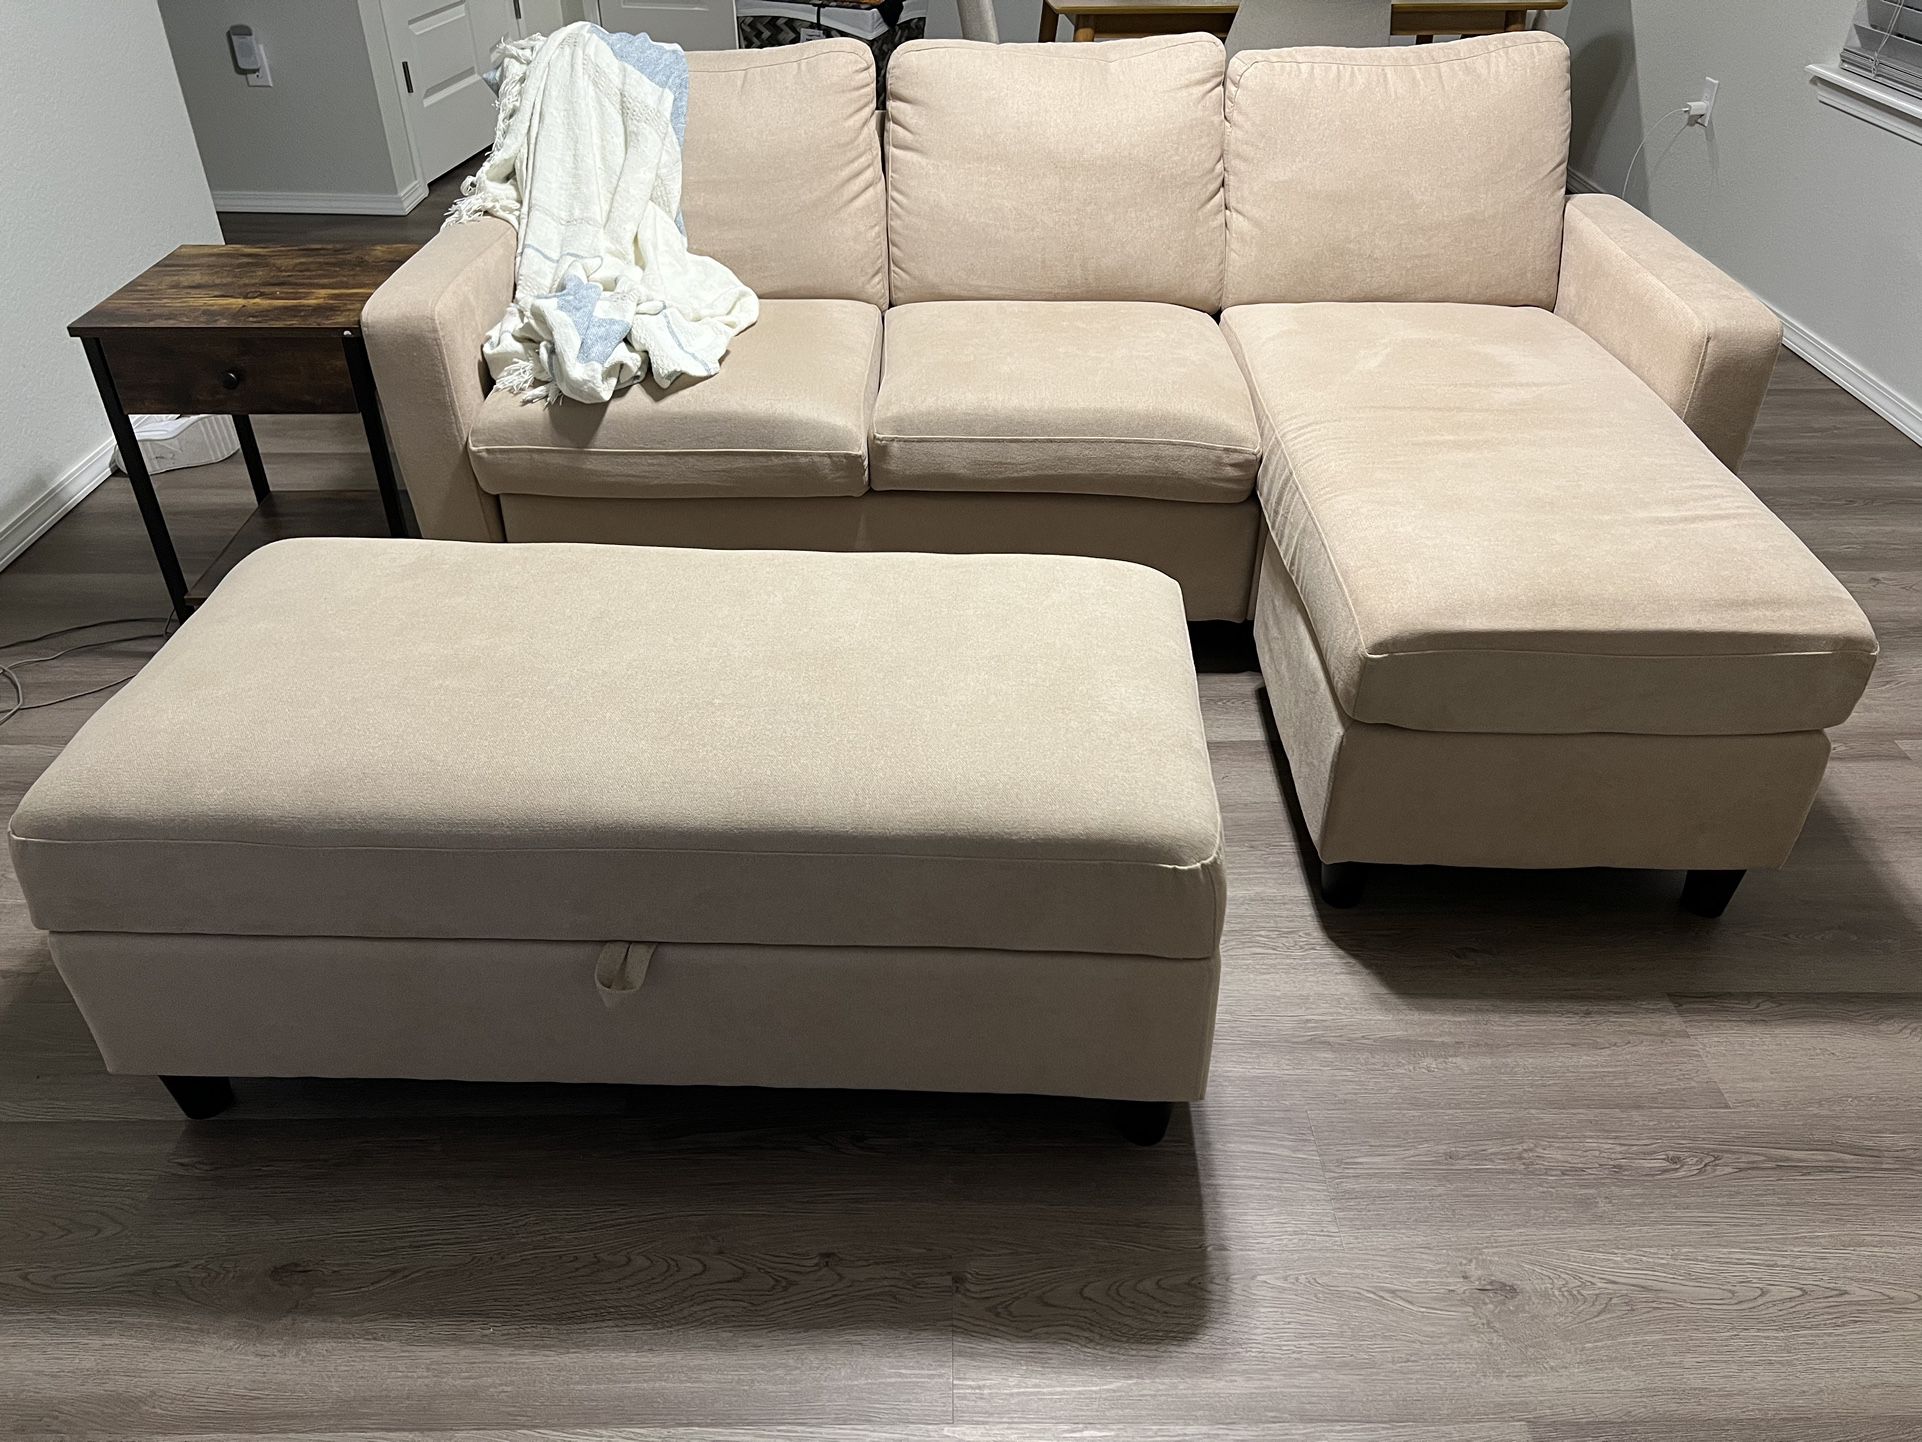 Sleeper Sectional Sofa With Storage Ottoman MUST GO BY TOMORROW!!